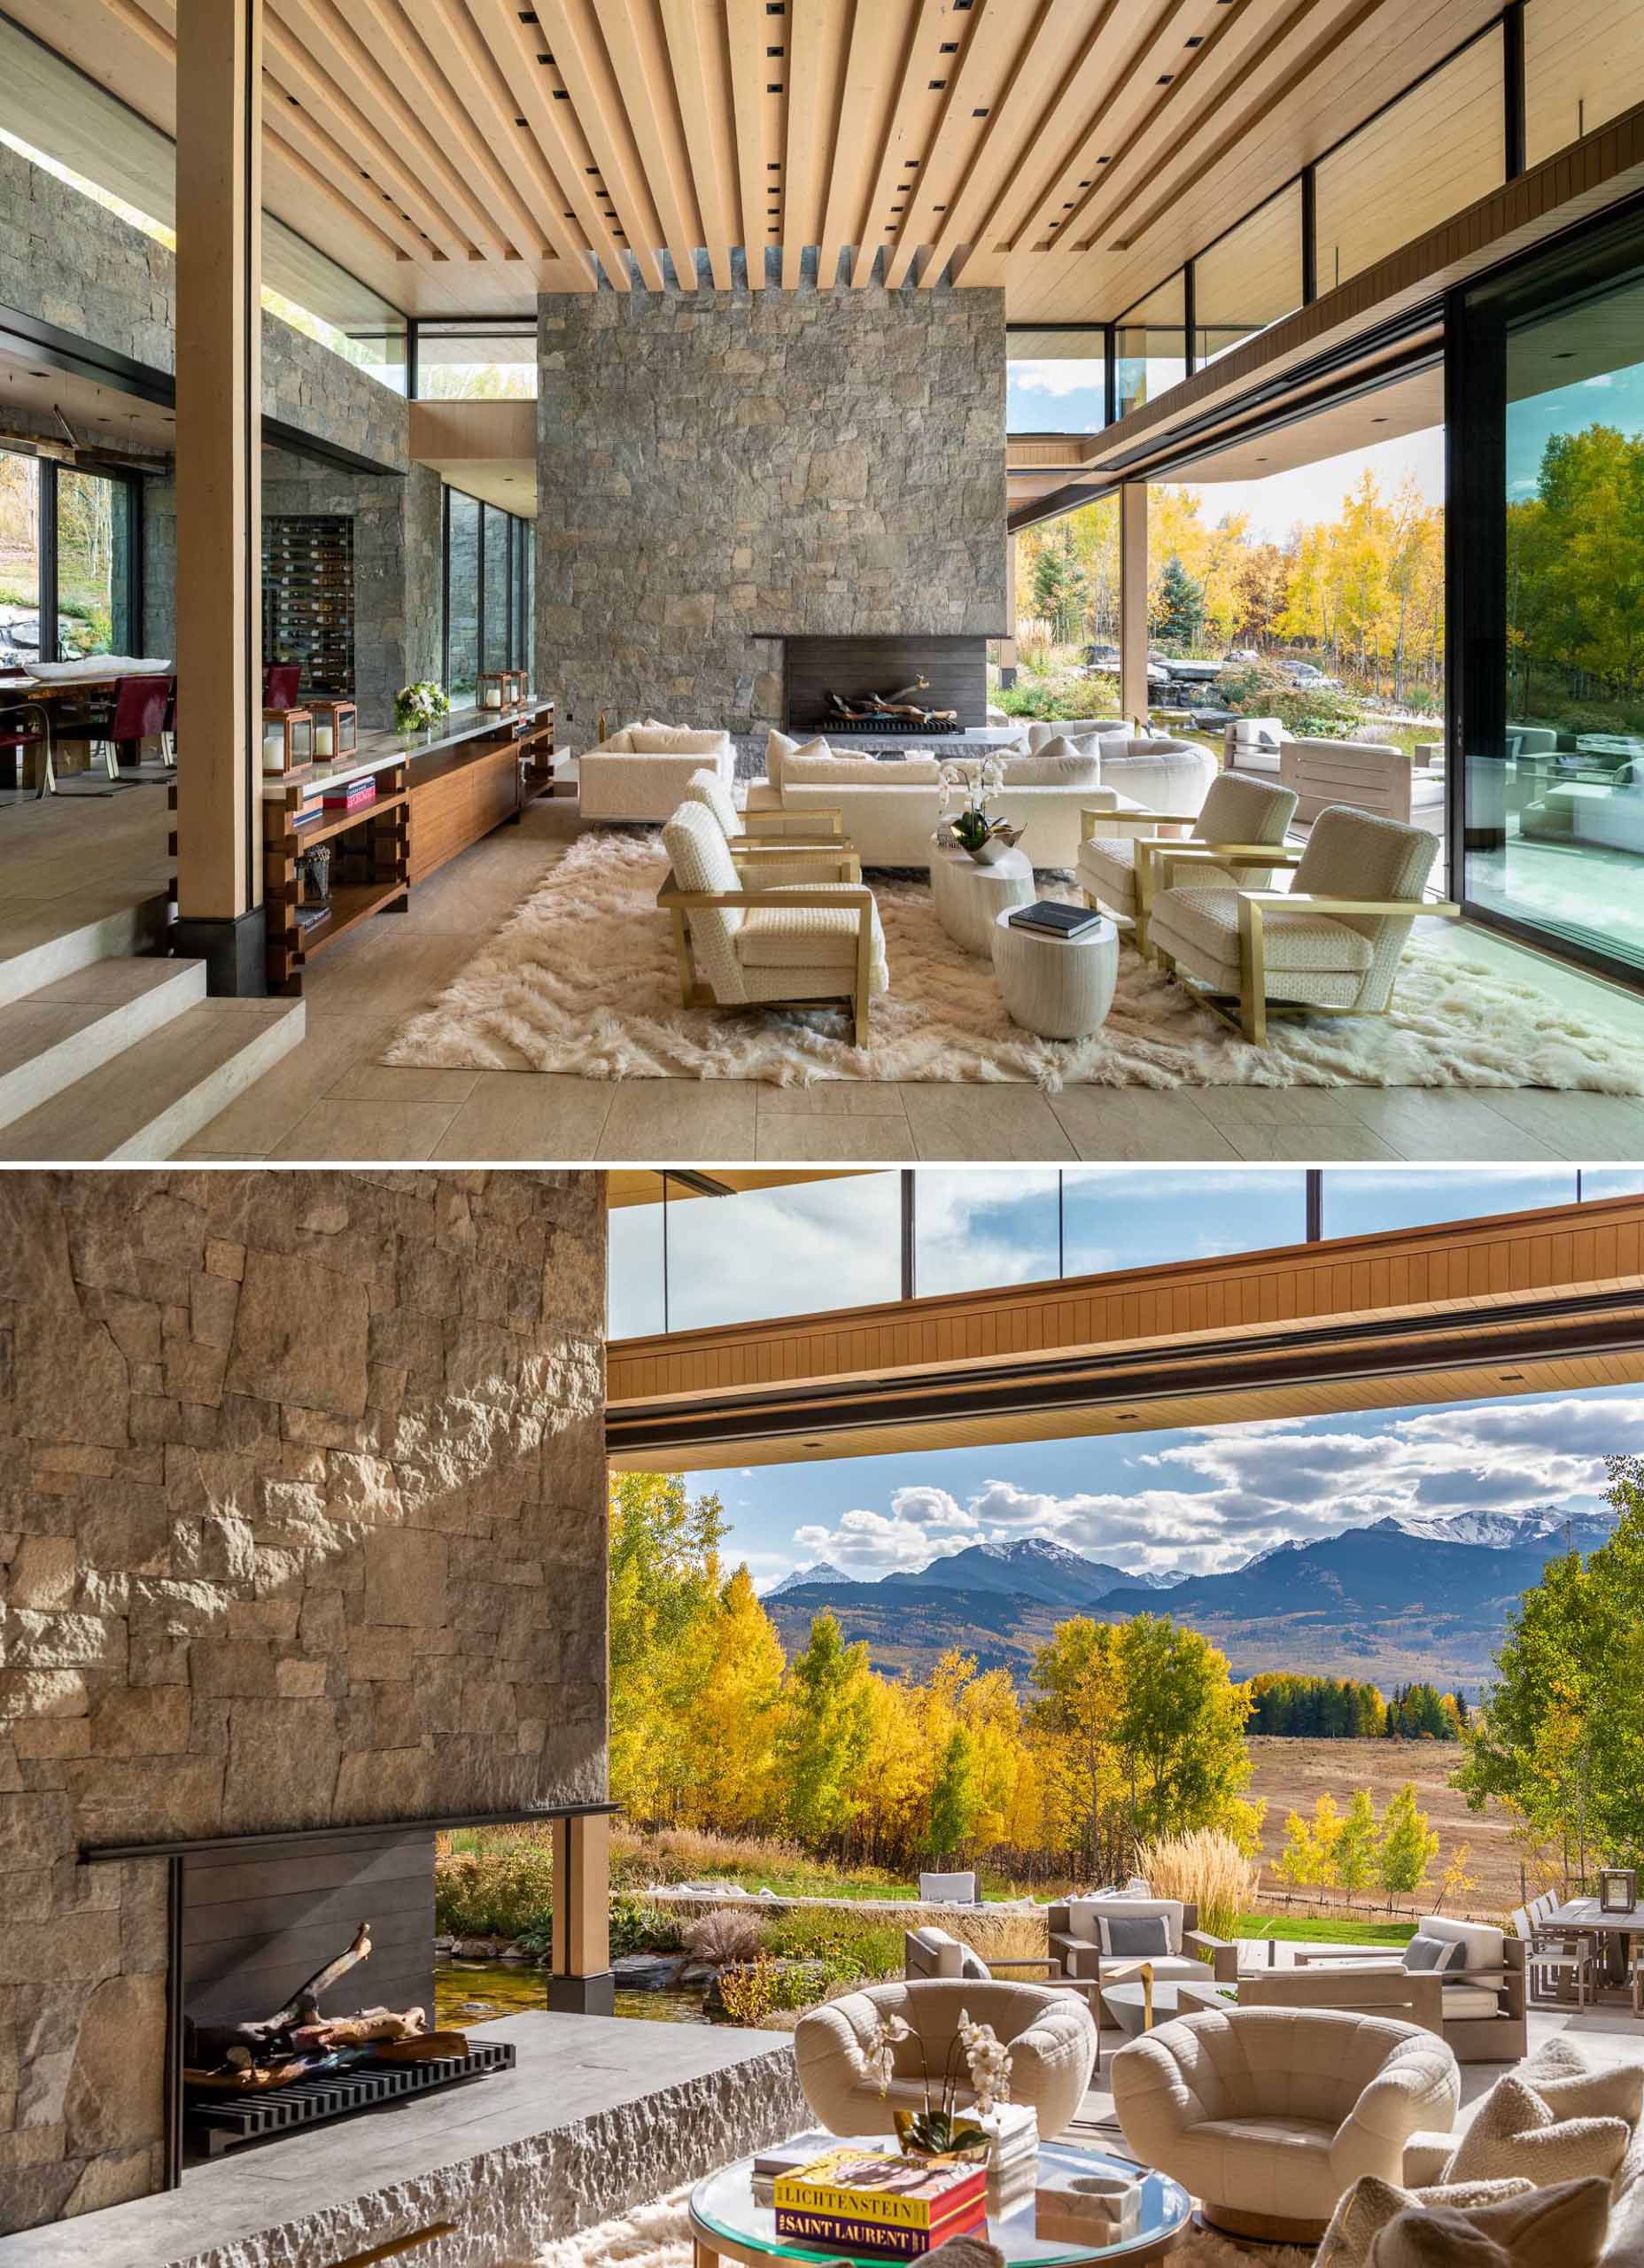 A modern living room with high wood ceilings and a steel-clad fireplace set within a massive stone element.